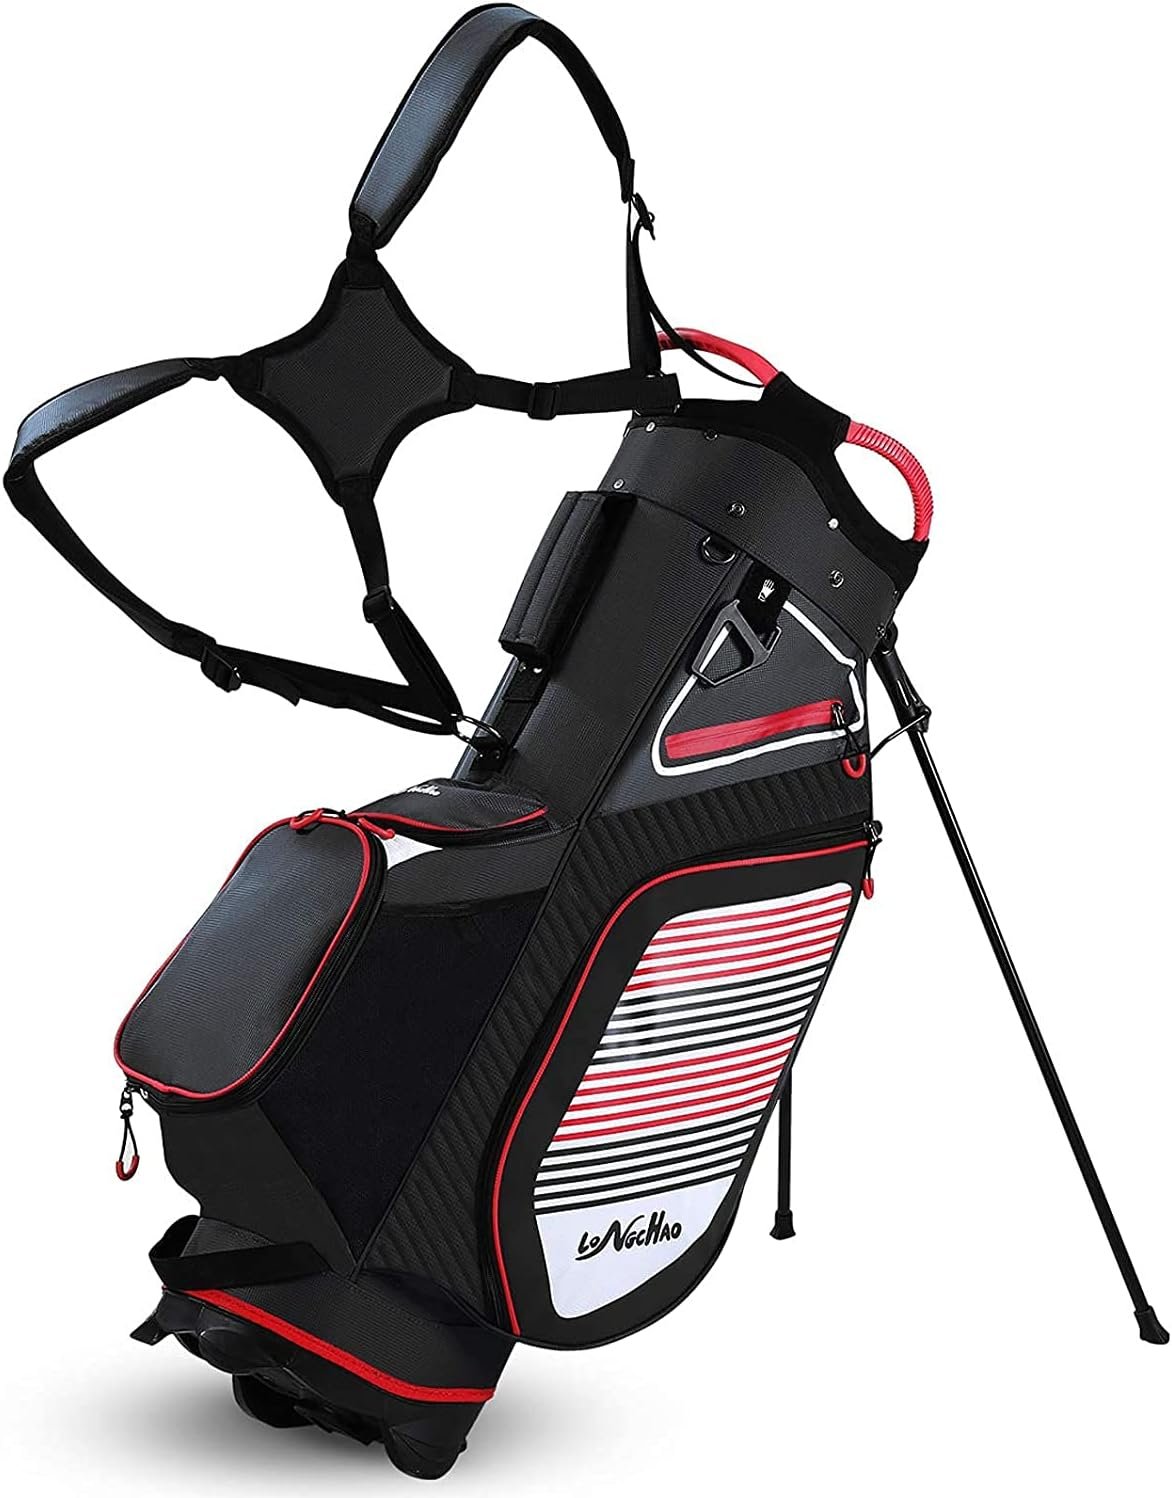 Golf Stand Bag with 14 Way Divider, Waterproof Durable Portable Golf Bag for Men, Lightweight Golf Club Travel Bags for Airlines